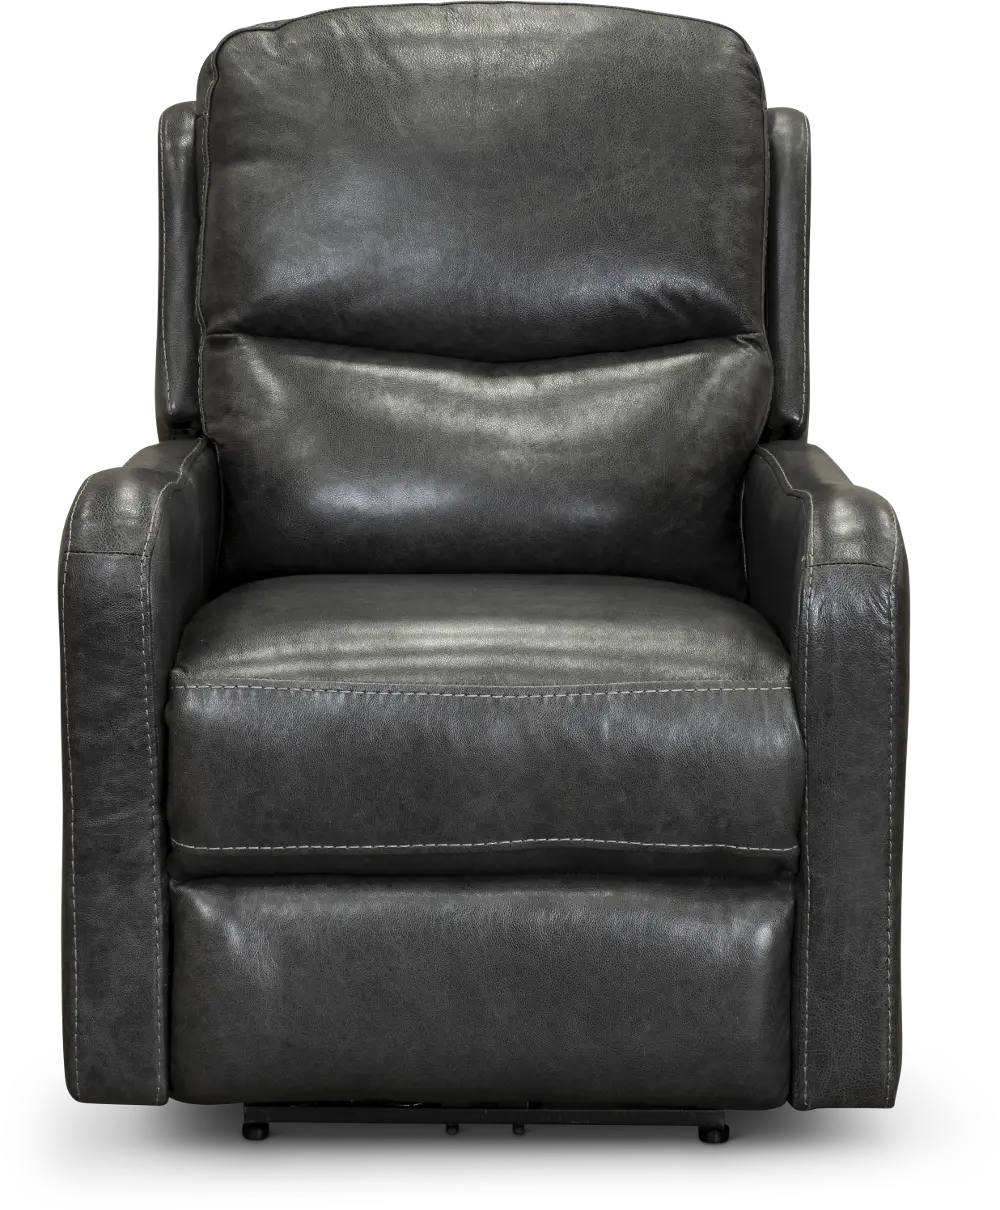 Charcoal Gray Leather-Match Power Recliner with Power Lumbar and Headrest - Chia-1